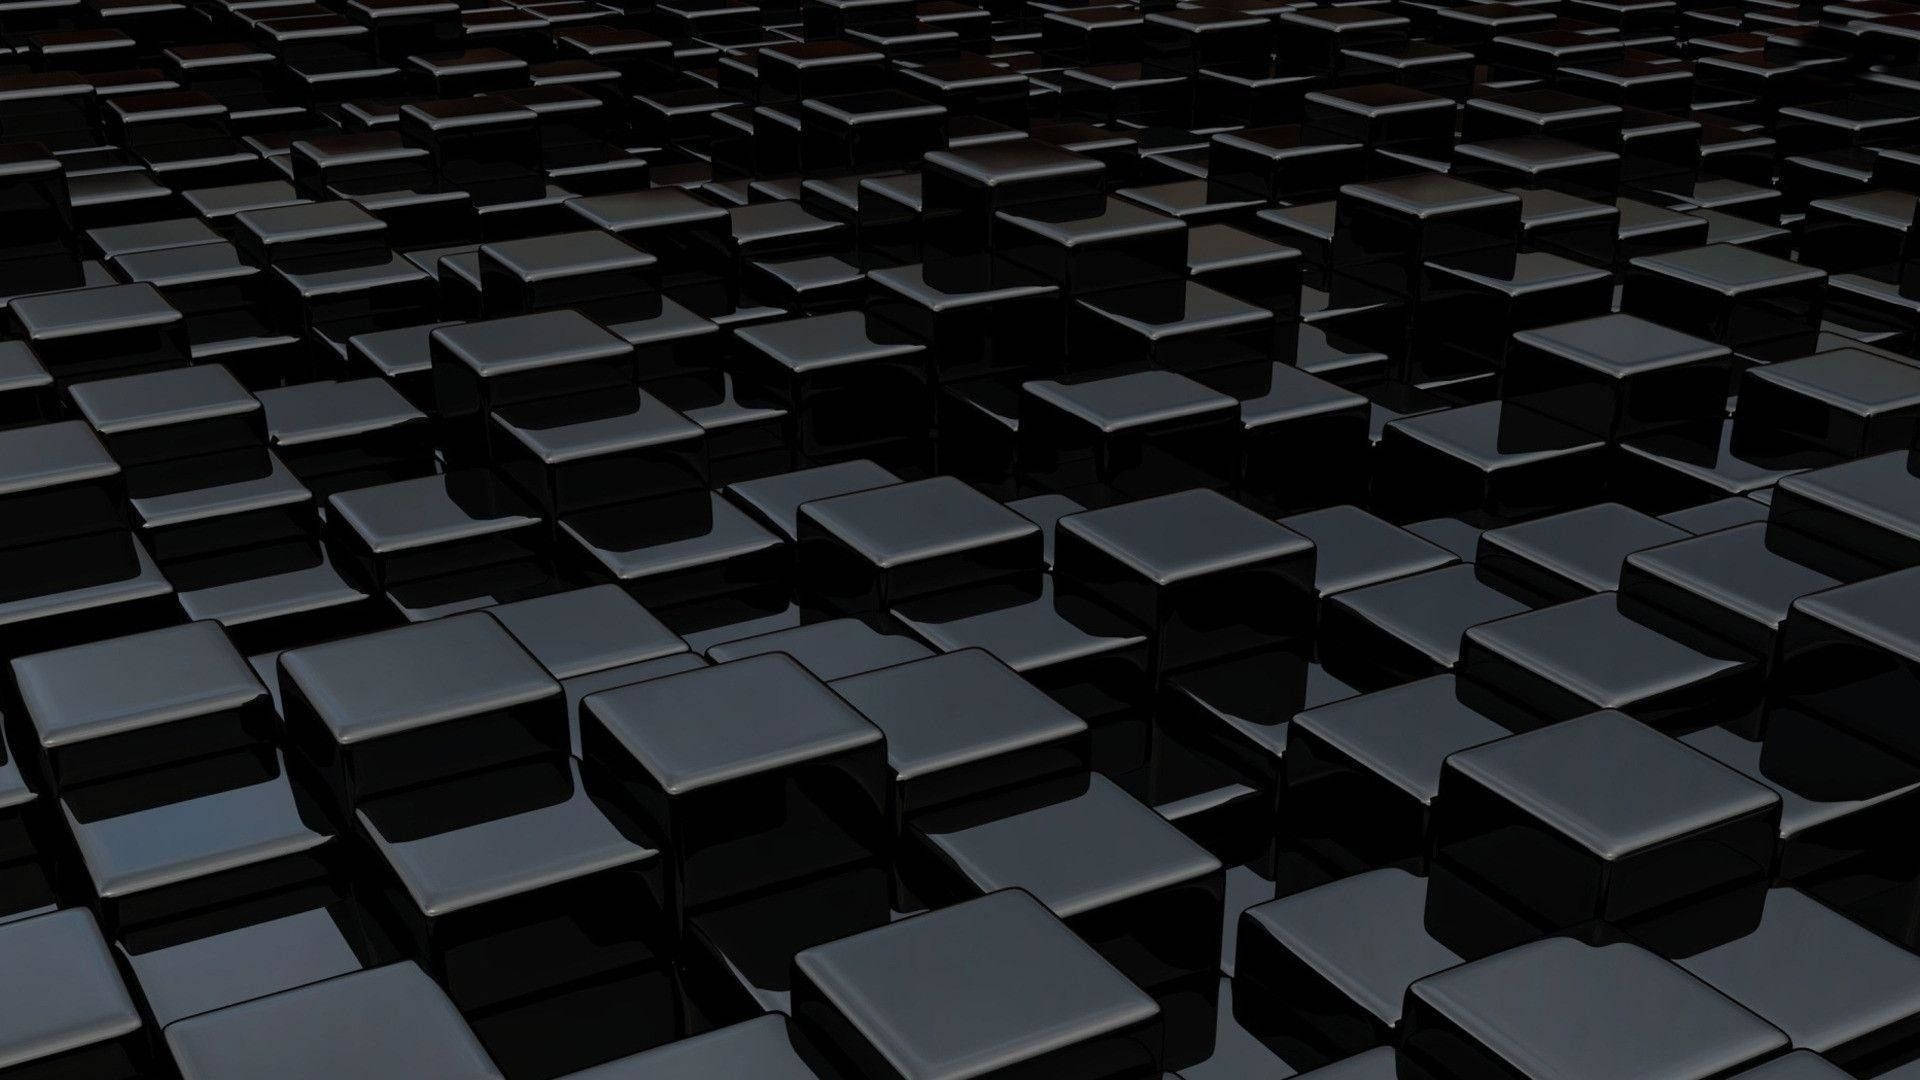 Layered Square Black 3d Background